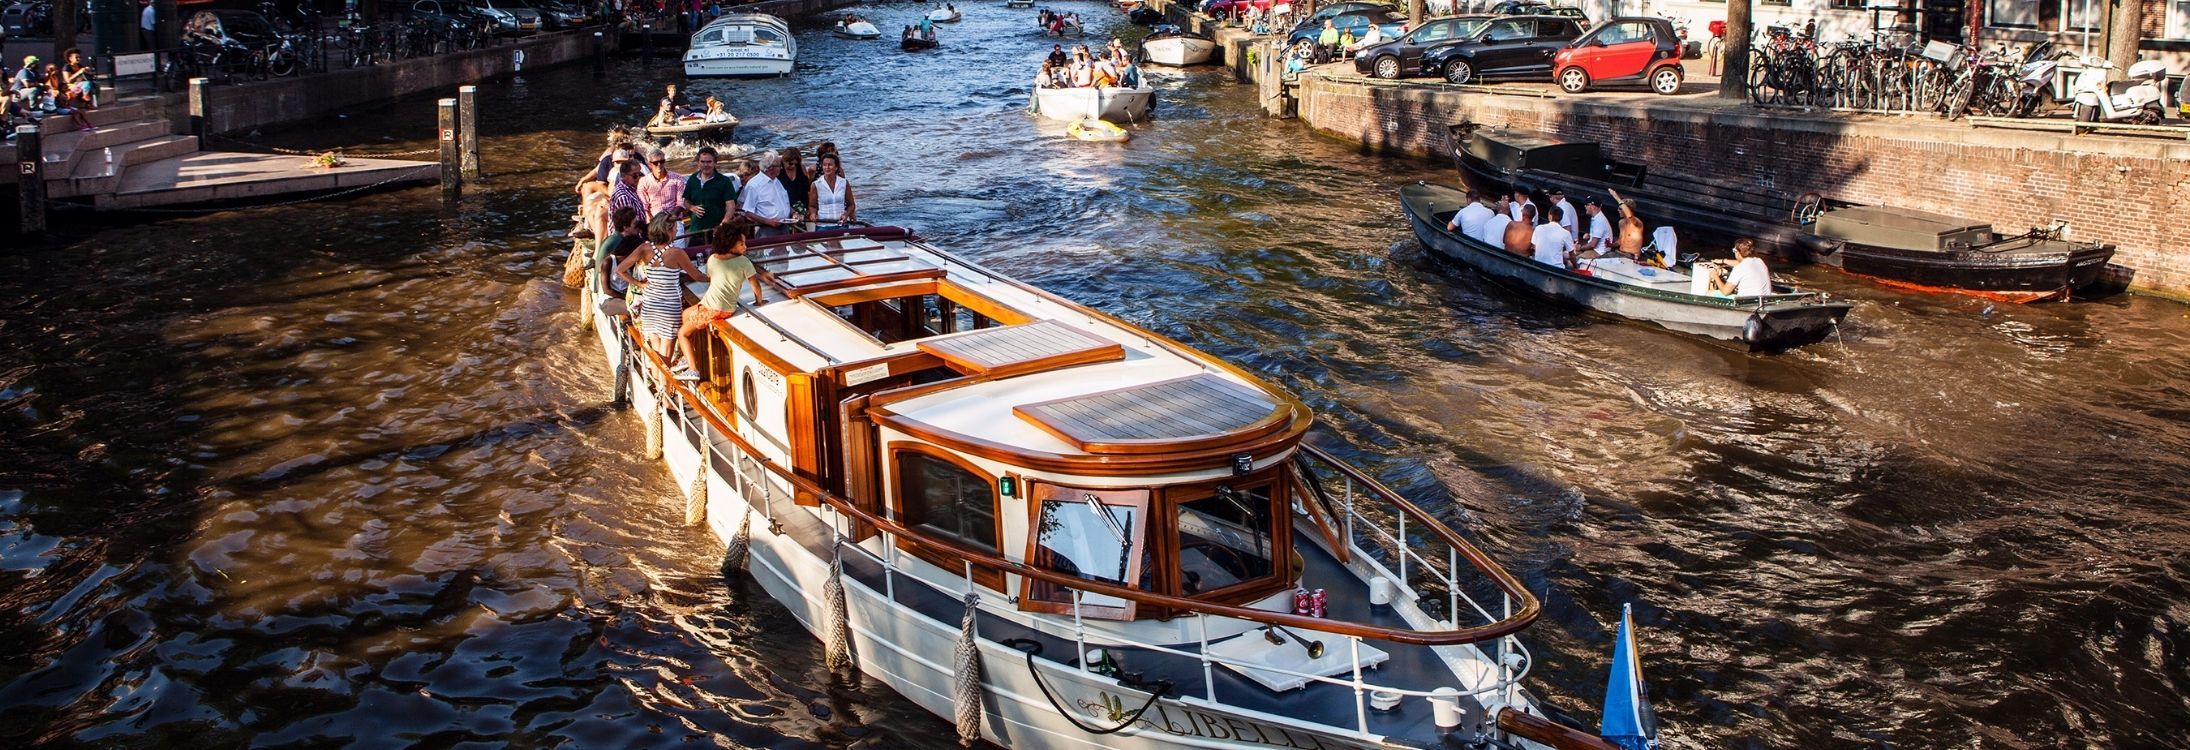 1-hour luxury canal tour, Amsterdam